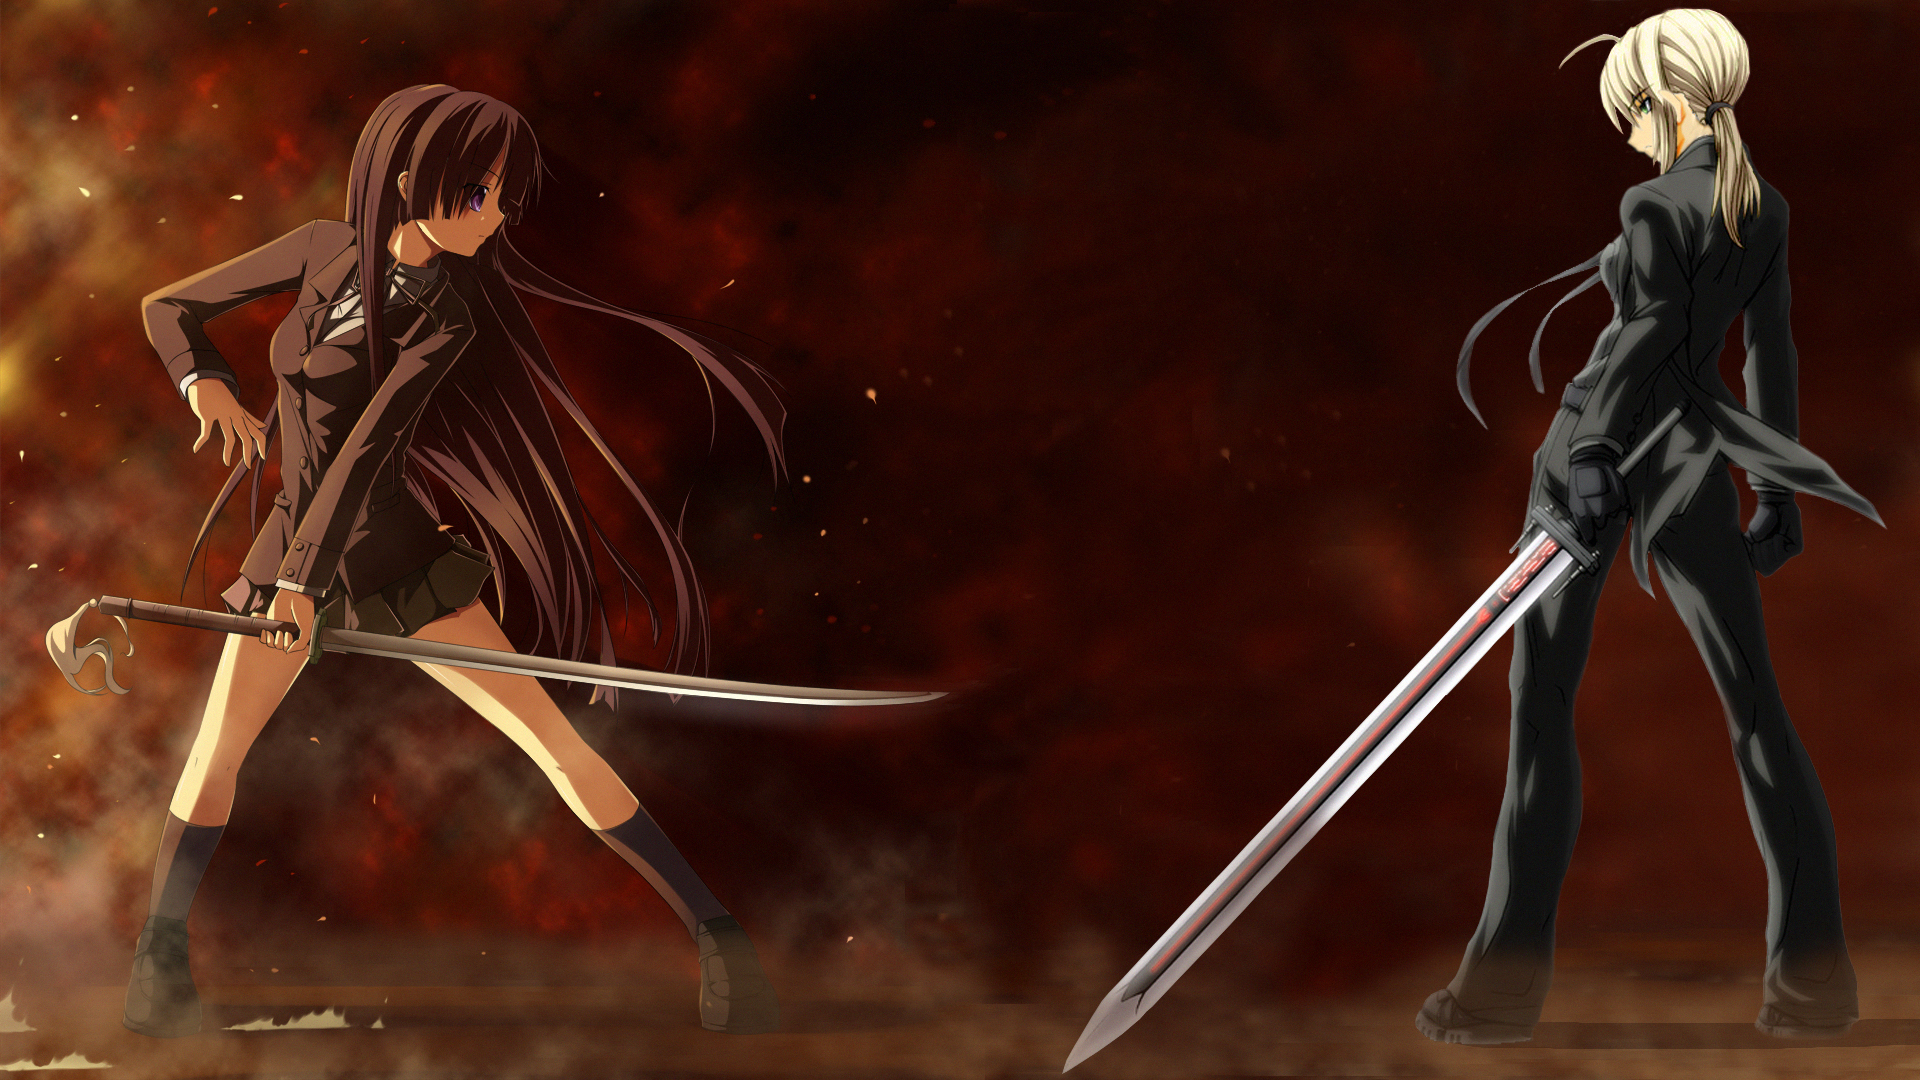 Saber and Mio Akiyama holding swords in Fate/Stay Night and K-ON! crossover.